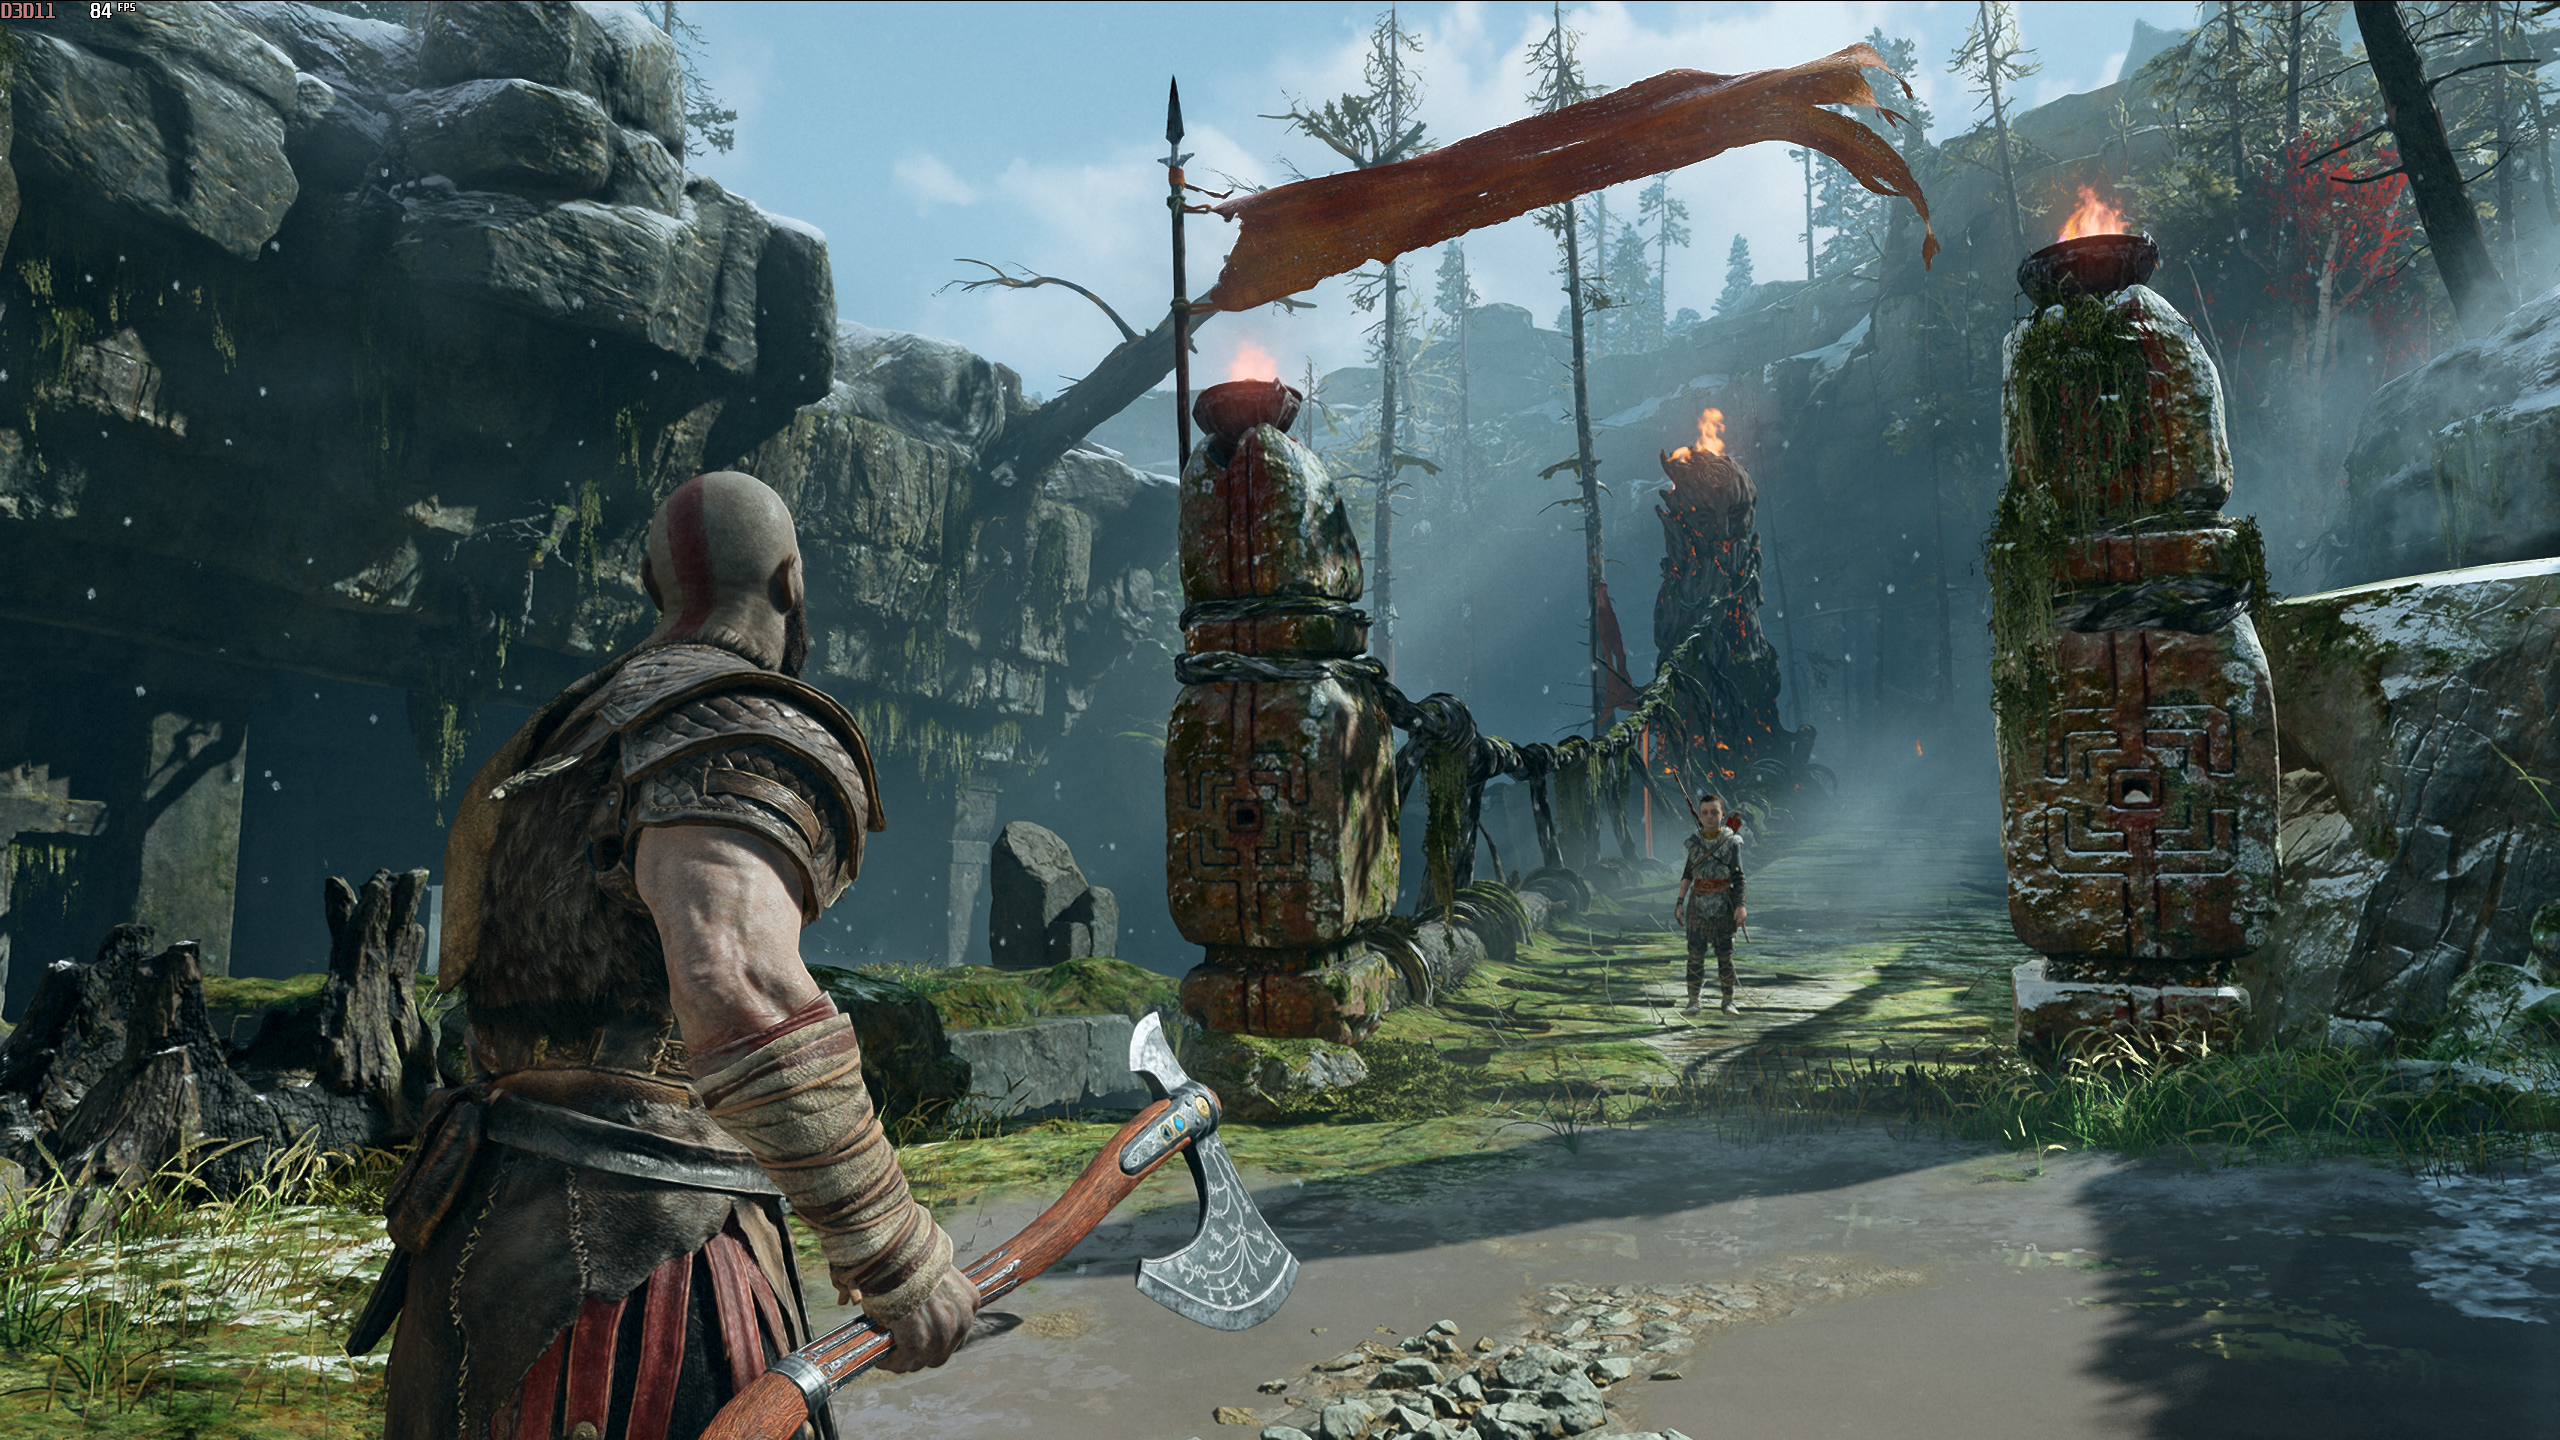 A scene from God of War showing DLSS on its Quality setting.